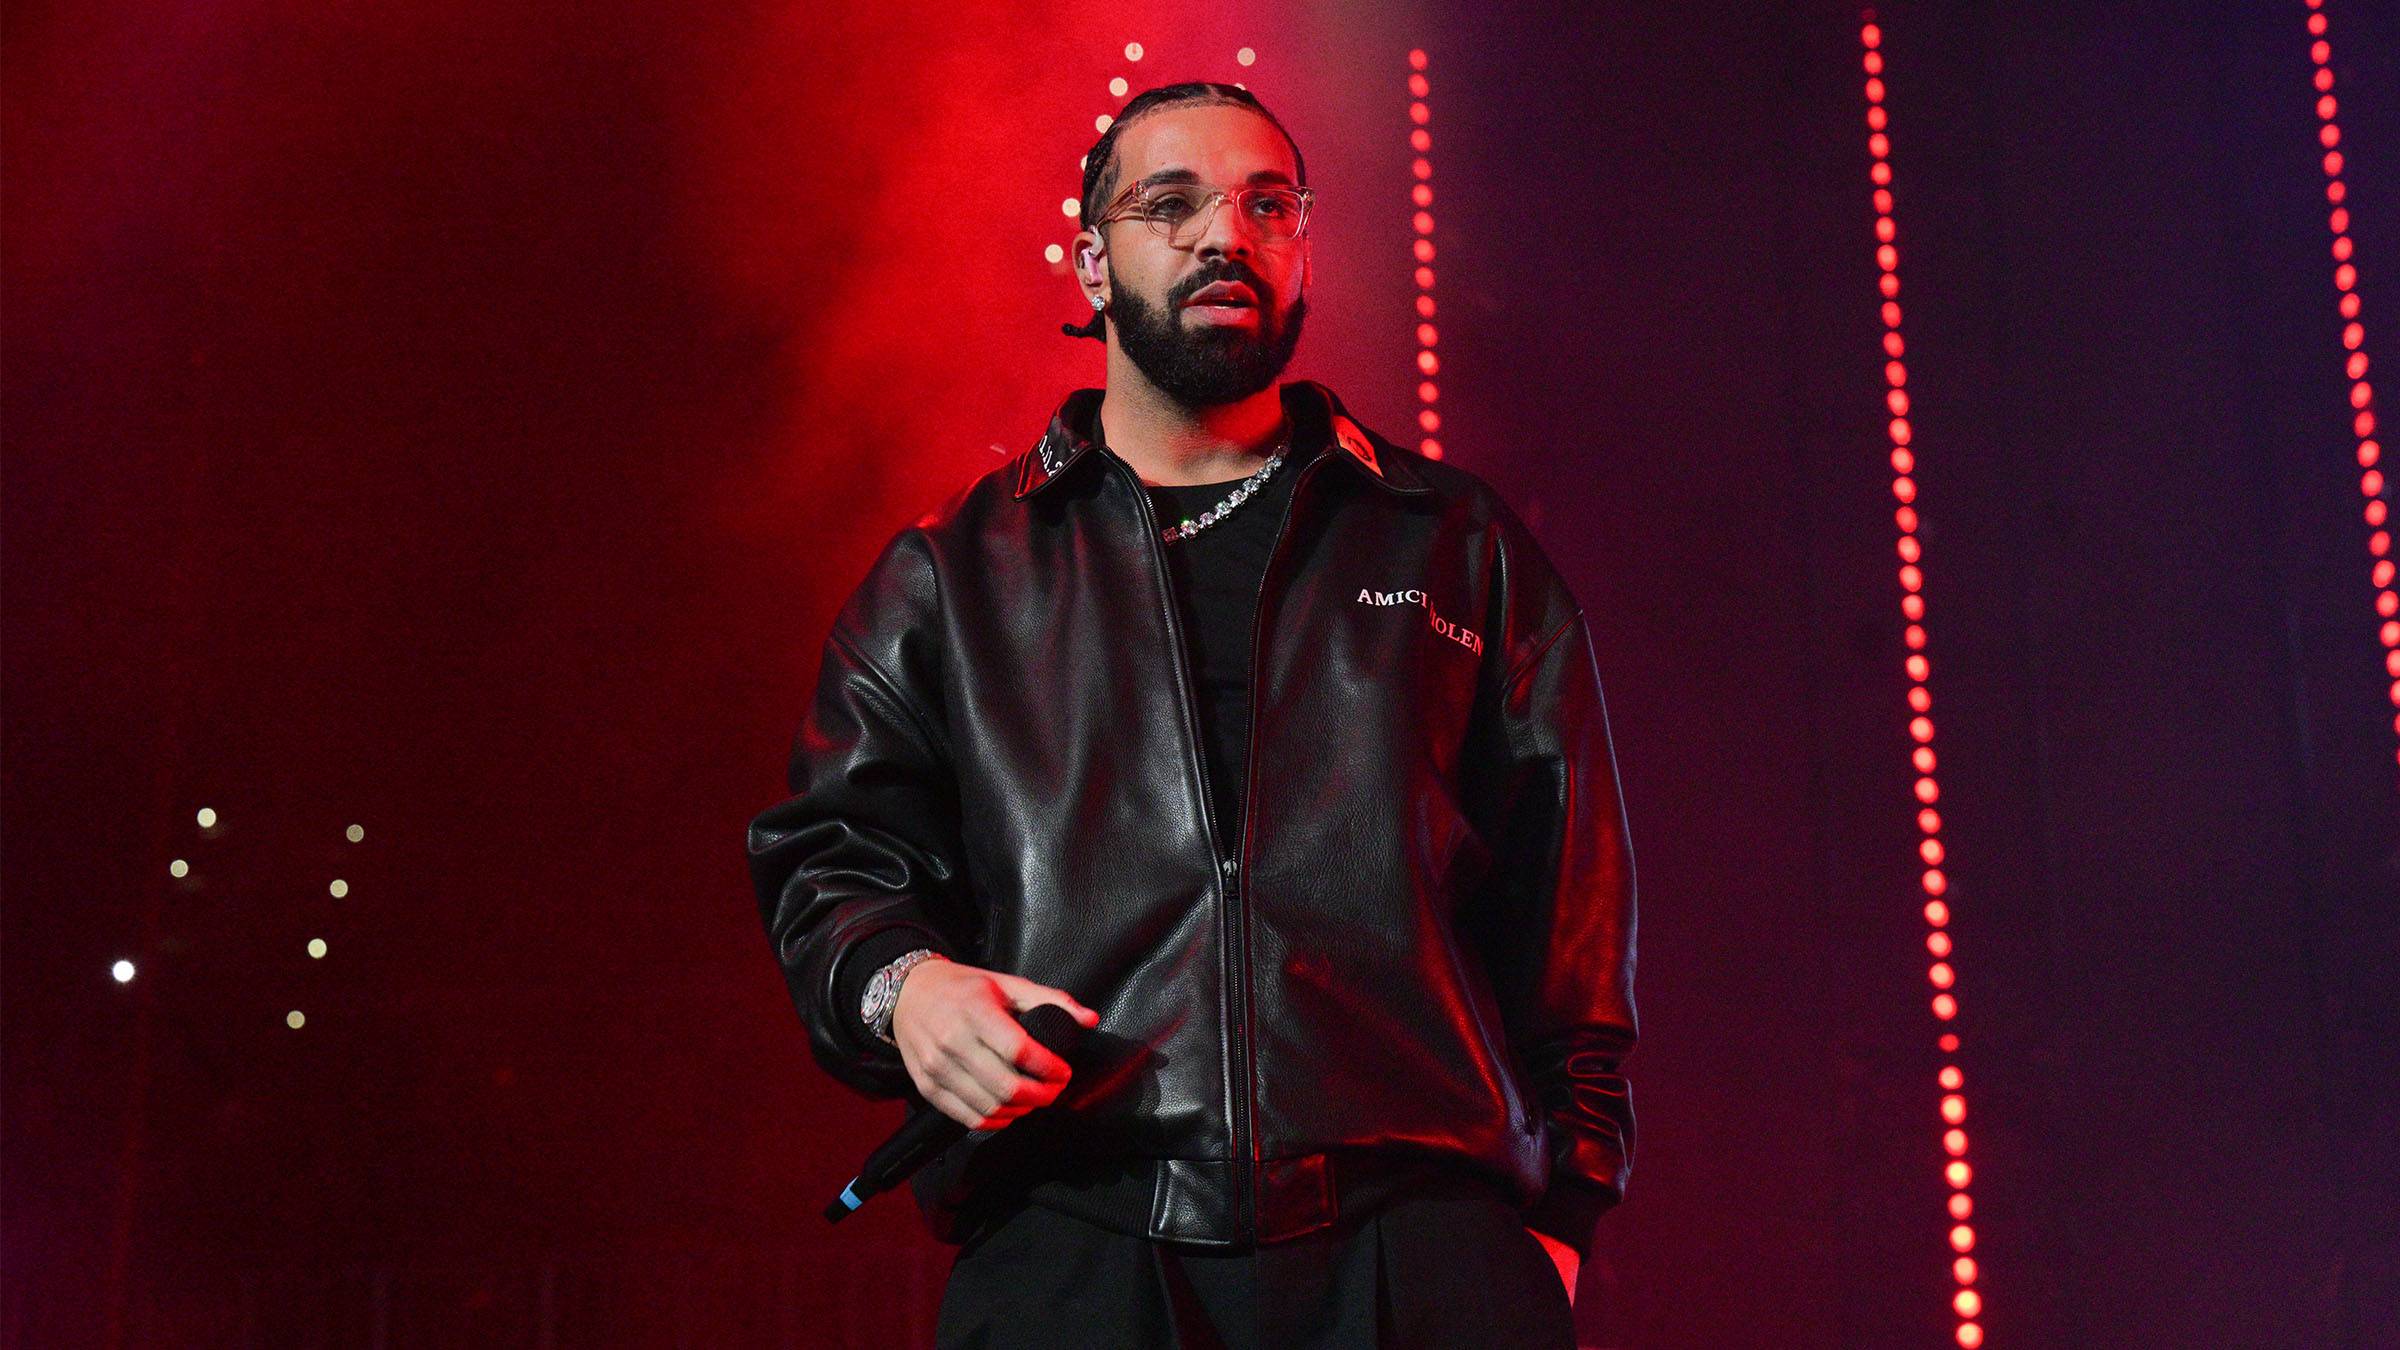 Woman Who Threw Her 36G Size Bra at Drake Speaks Out, News